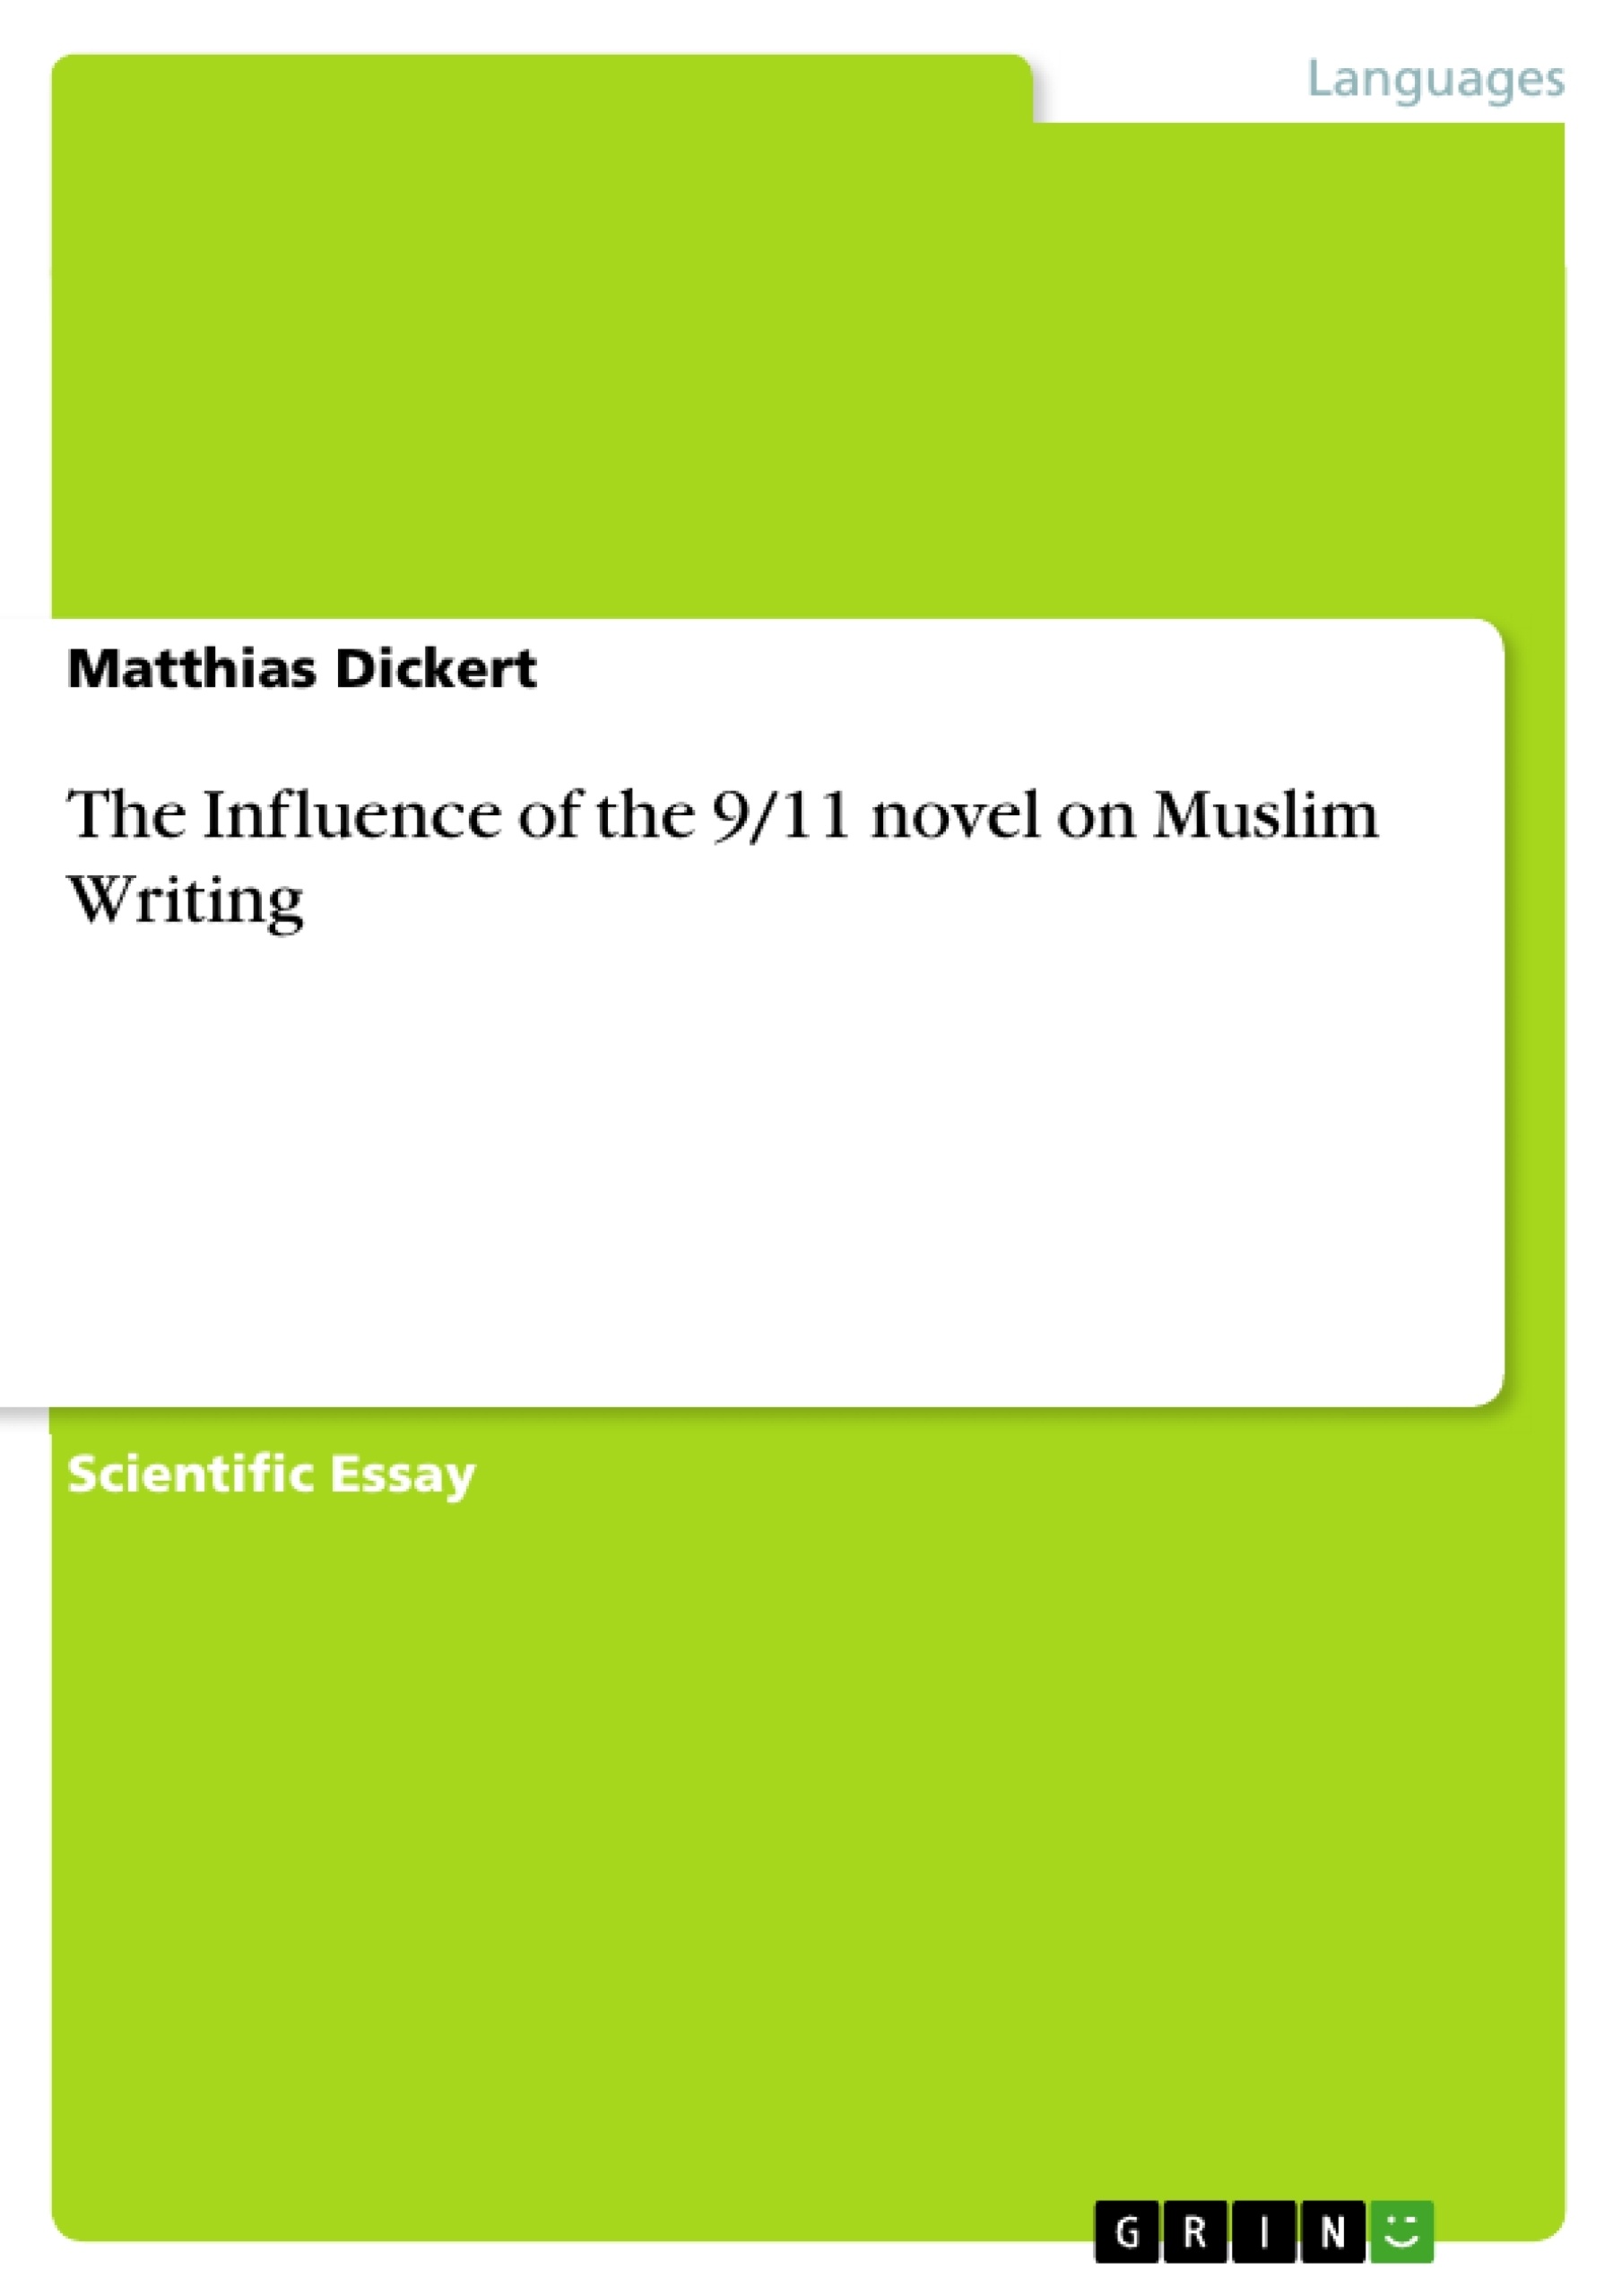 Title: The Influence of the 9/11 novel on Muslim Writing